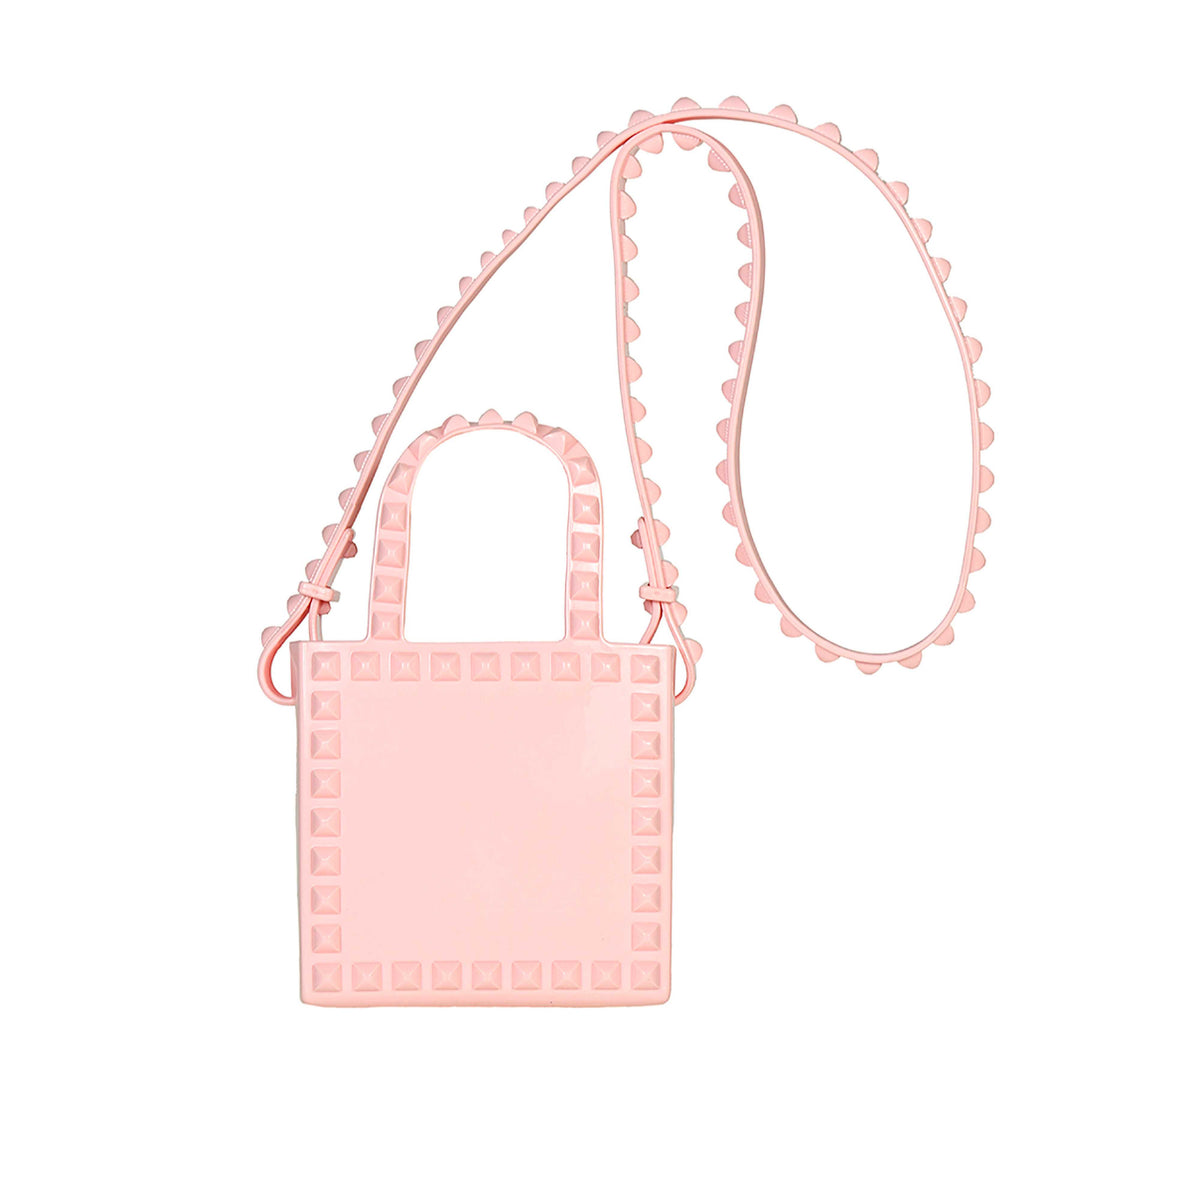 Studded jelly crossbody purse in baby pink